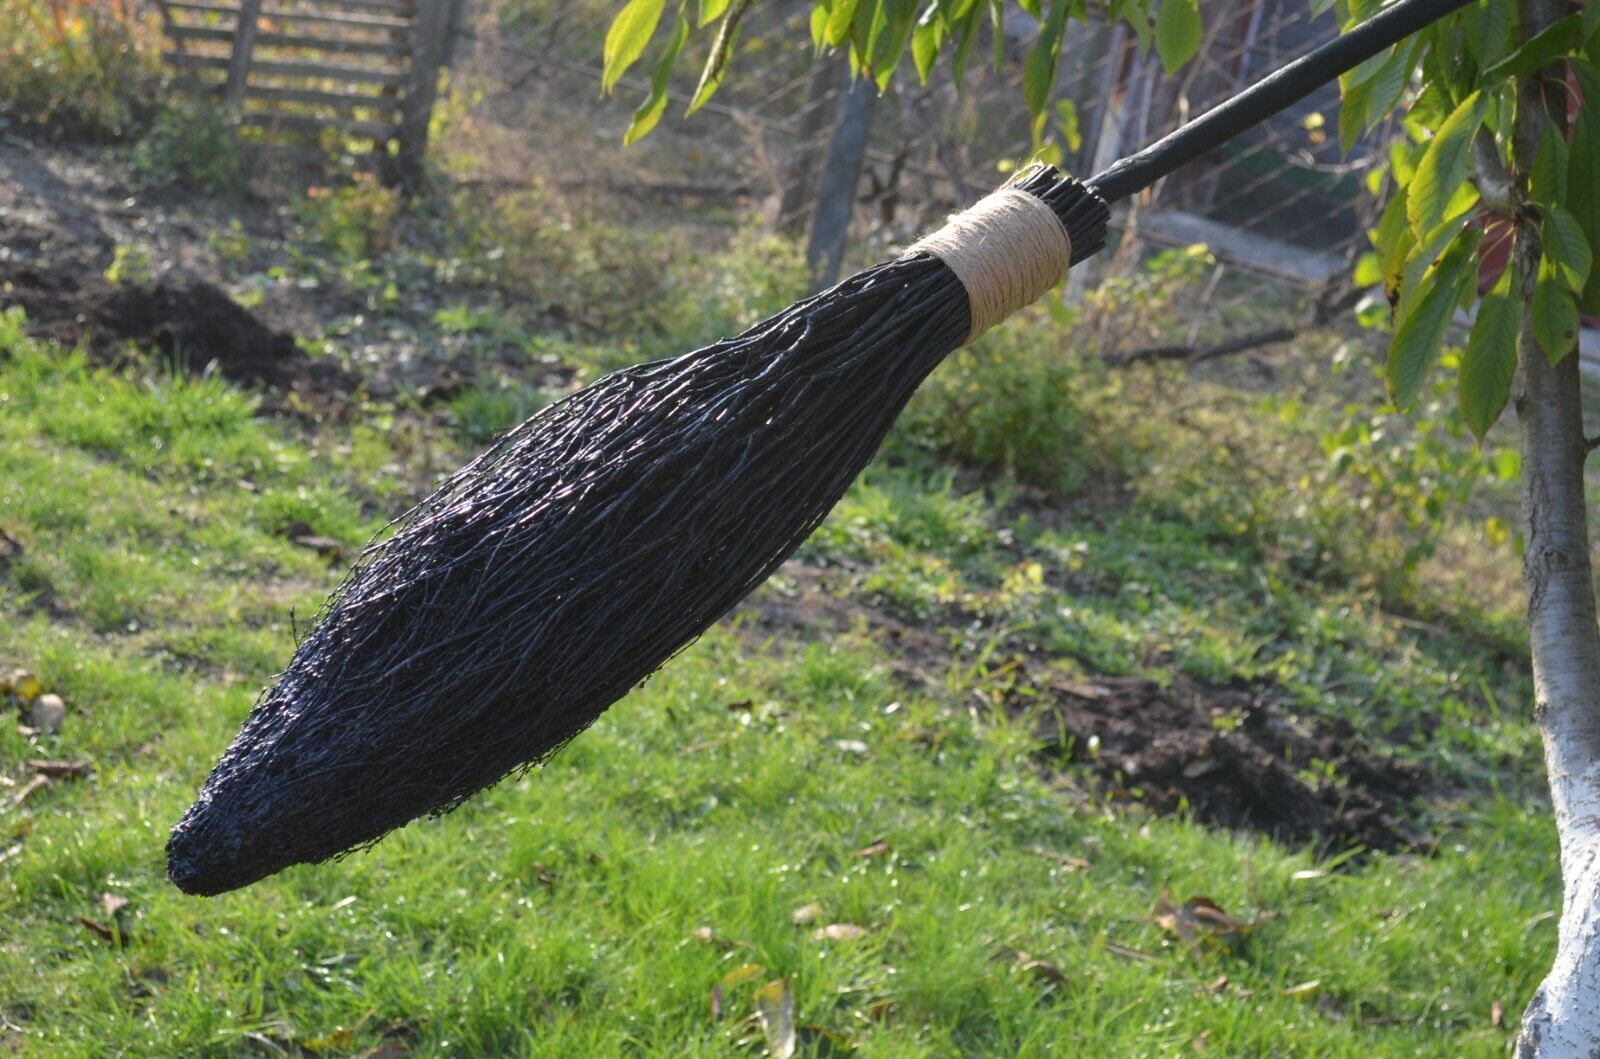 Black Witches Broom Wizard broom Witches Broom Besom, Wiccan Broom, Jumping Broo